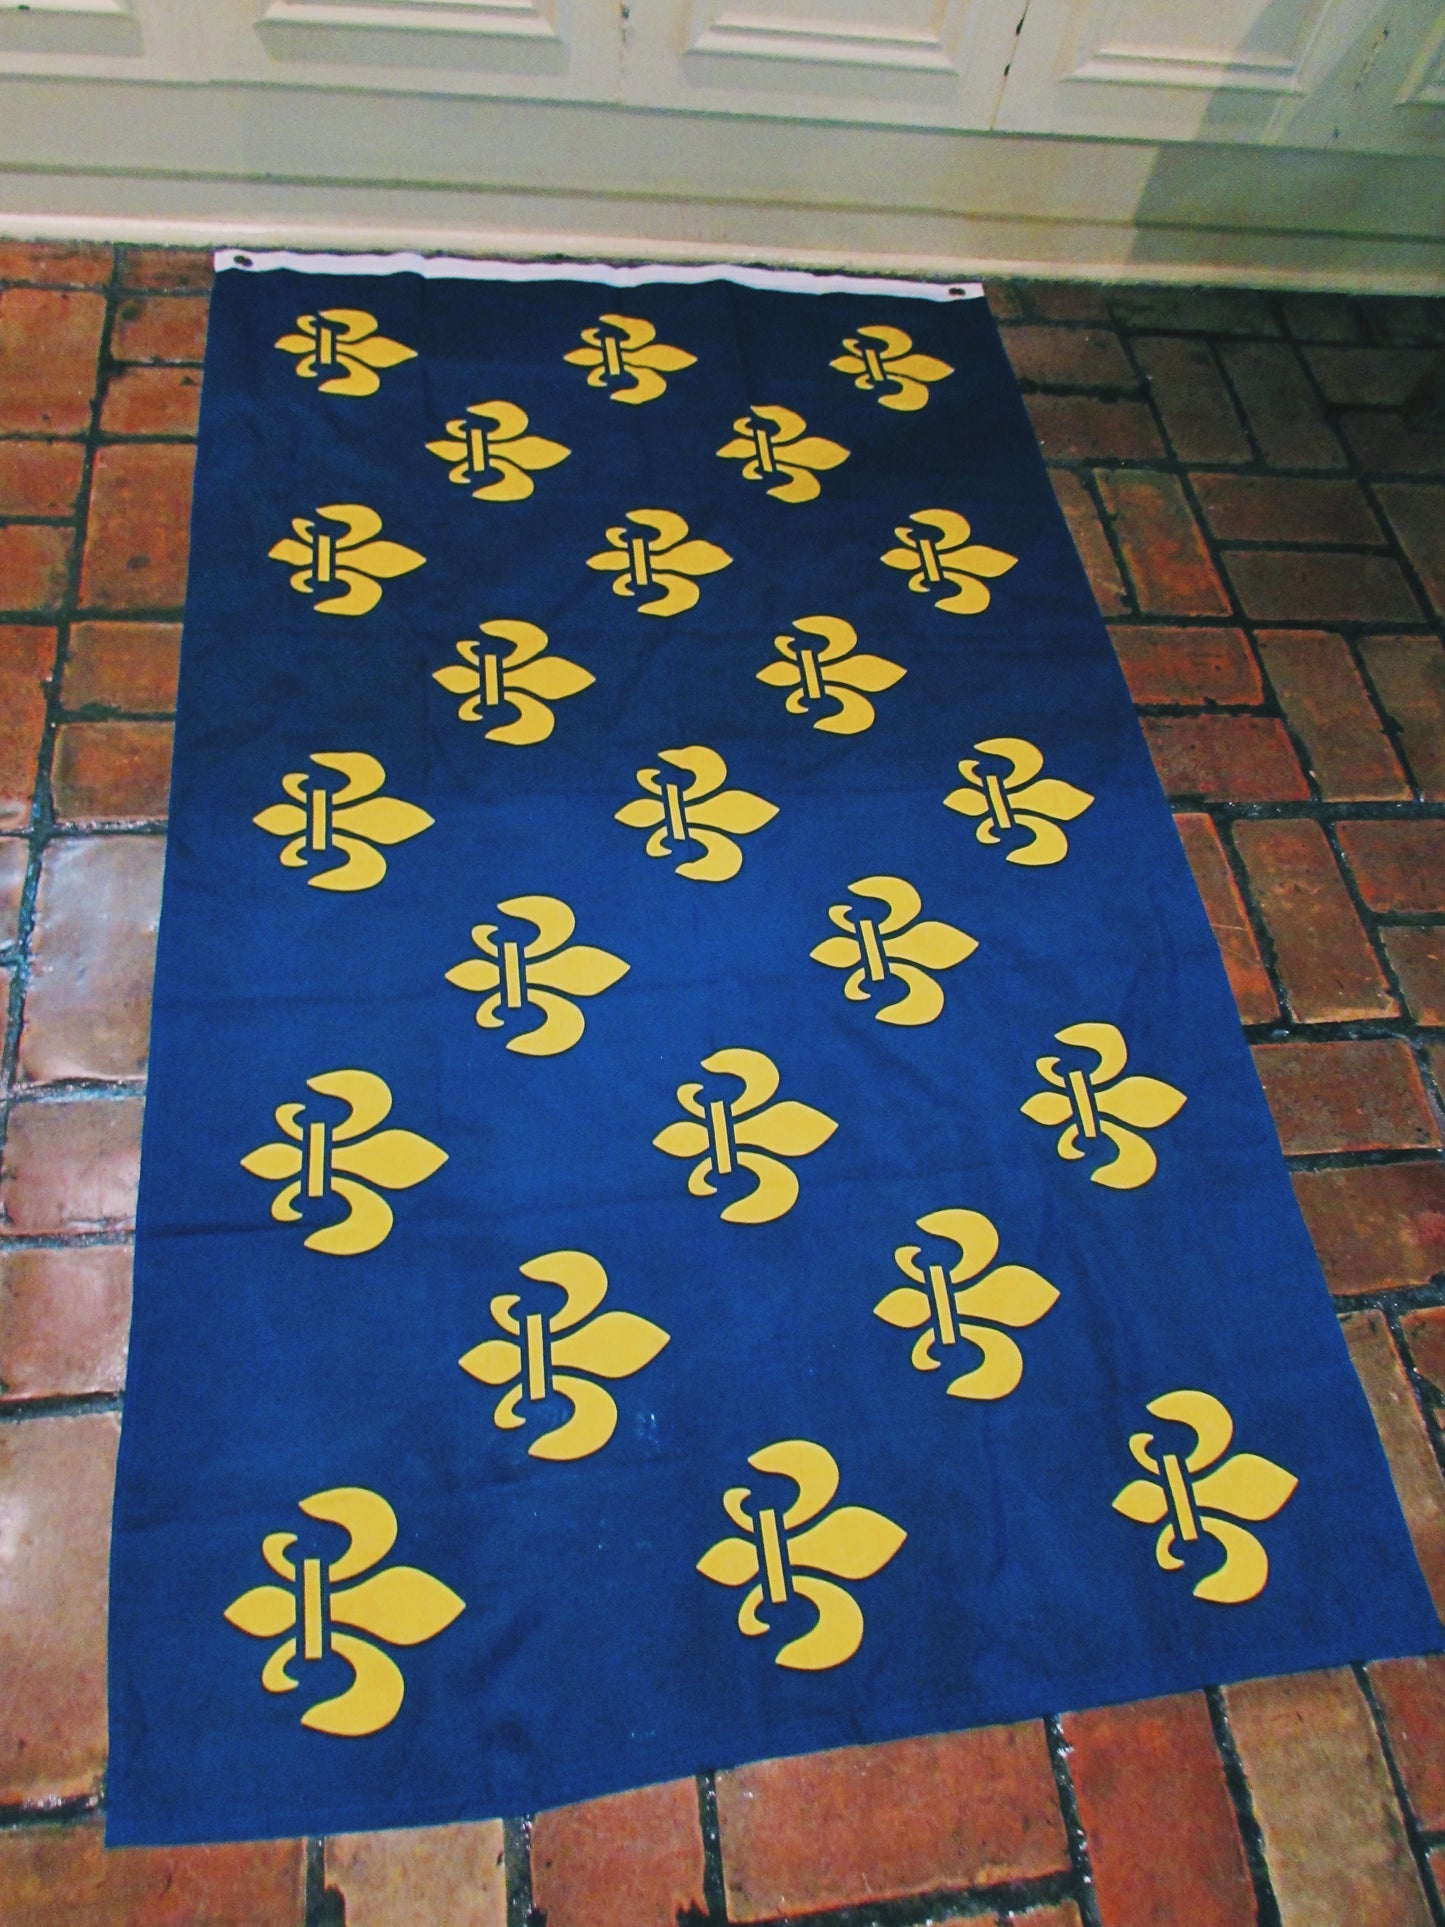 Bourbon Lily Flag. The fleur-de-lis is a stylized lily (in French, fleur means "flower", andlis means "lily") that is used as a decorative design or symbol.     3x5ft flag has header tape and 2 metal grommets Flag is dye-sublimated with beautiful bold colors. Printed on one side all the way through the fabric.  Double-stitched around all edges with 4 rows of stitching on fly edge.